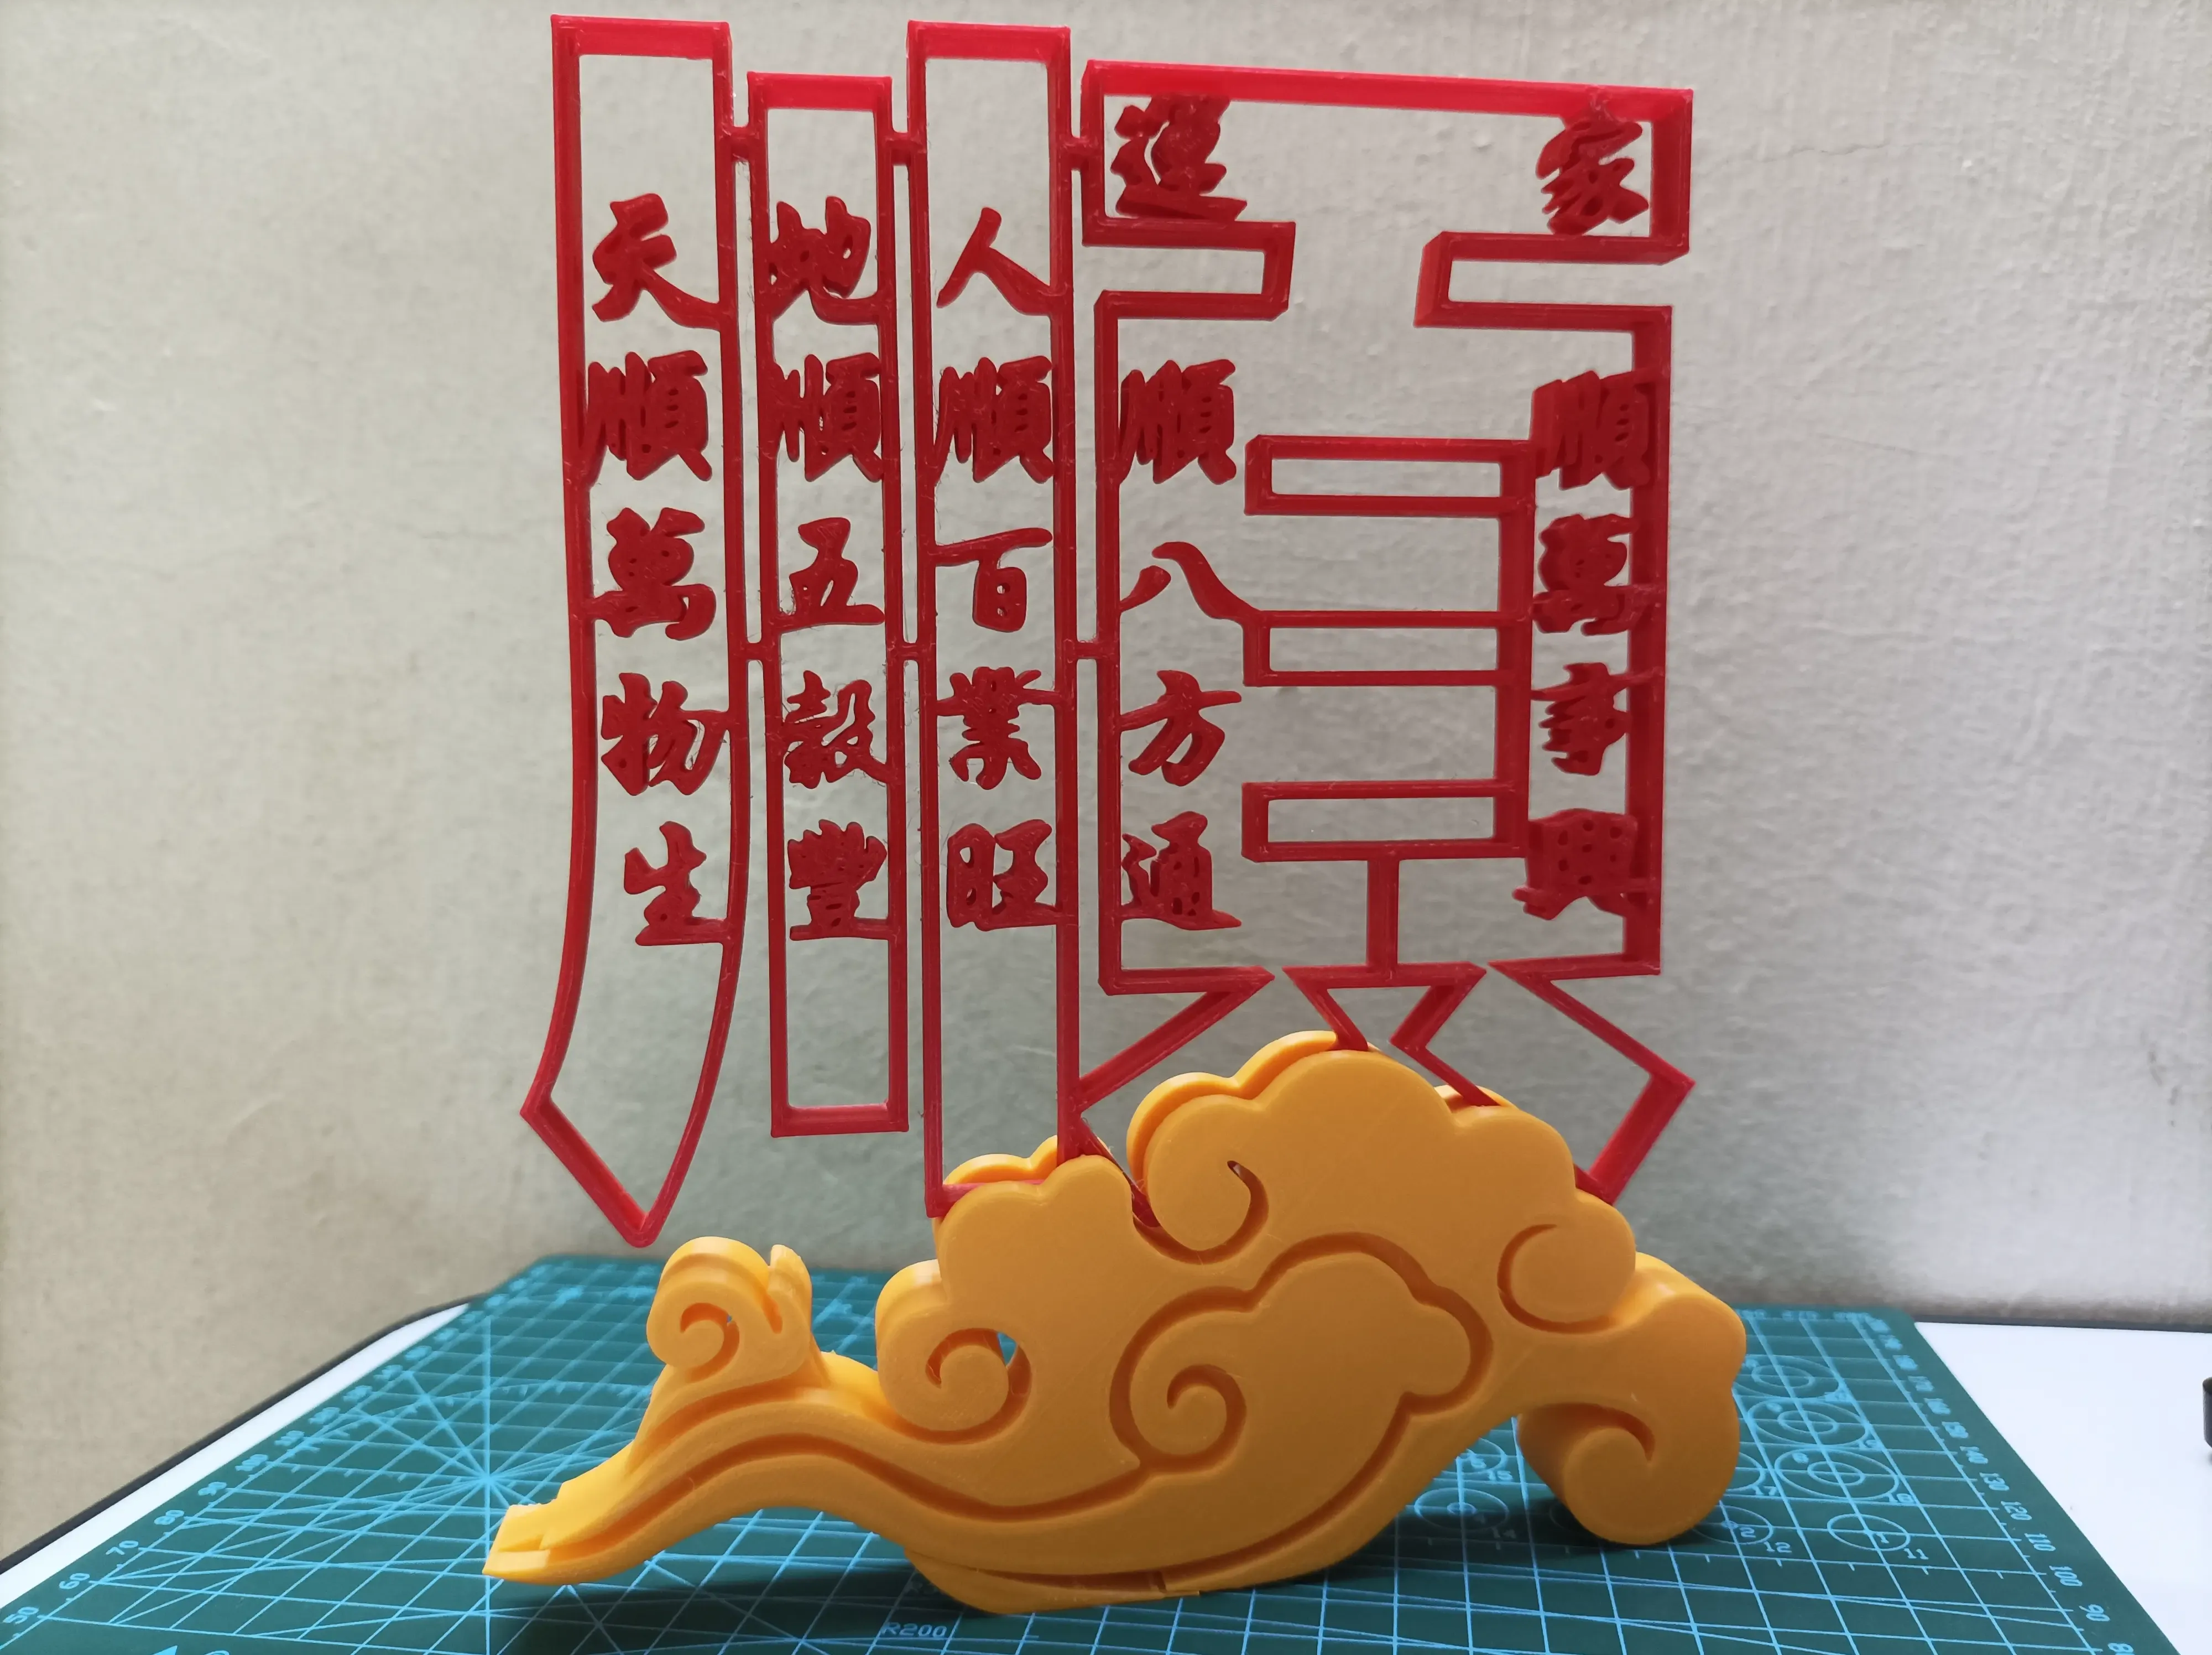 CHINESE NEW YEAR DECORATION (GO WELL)